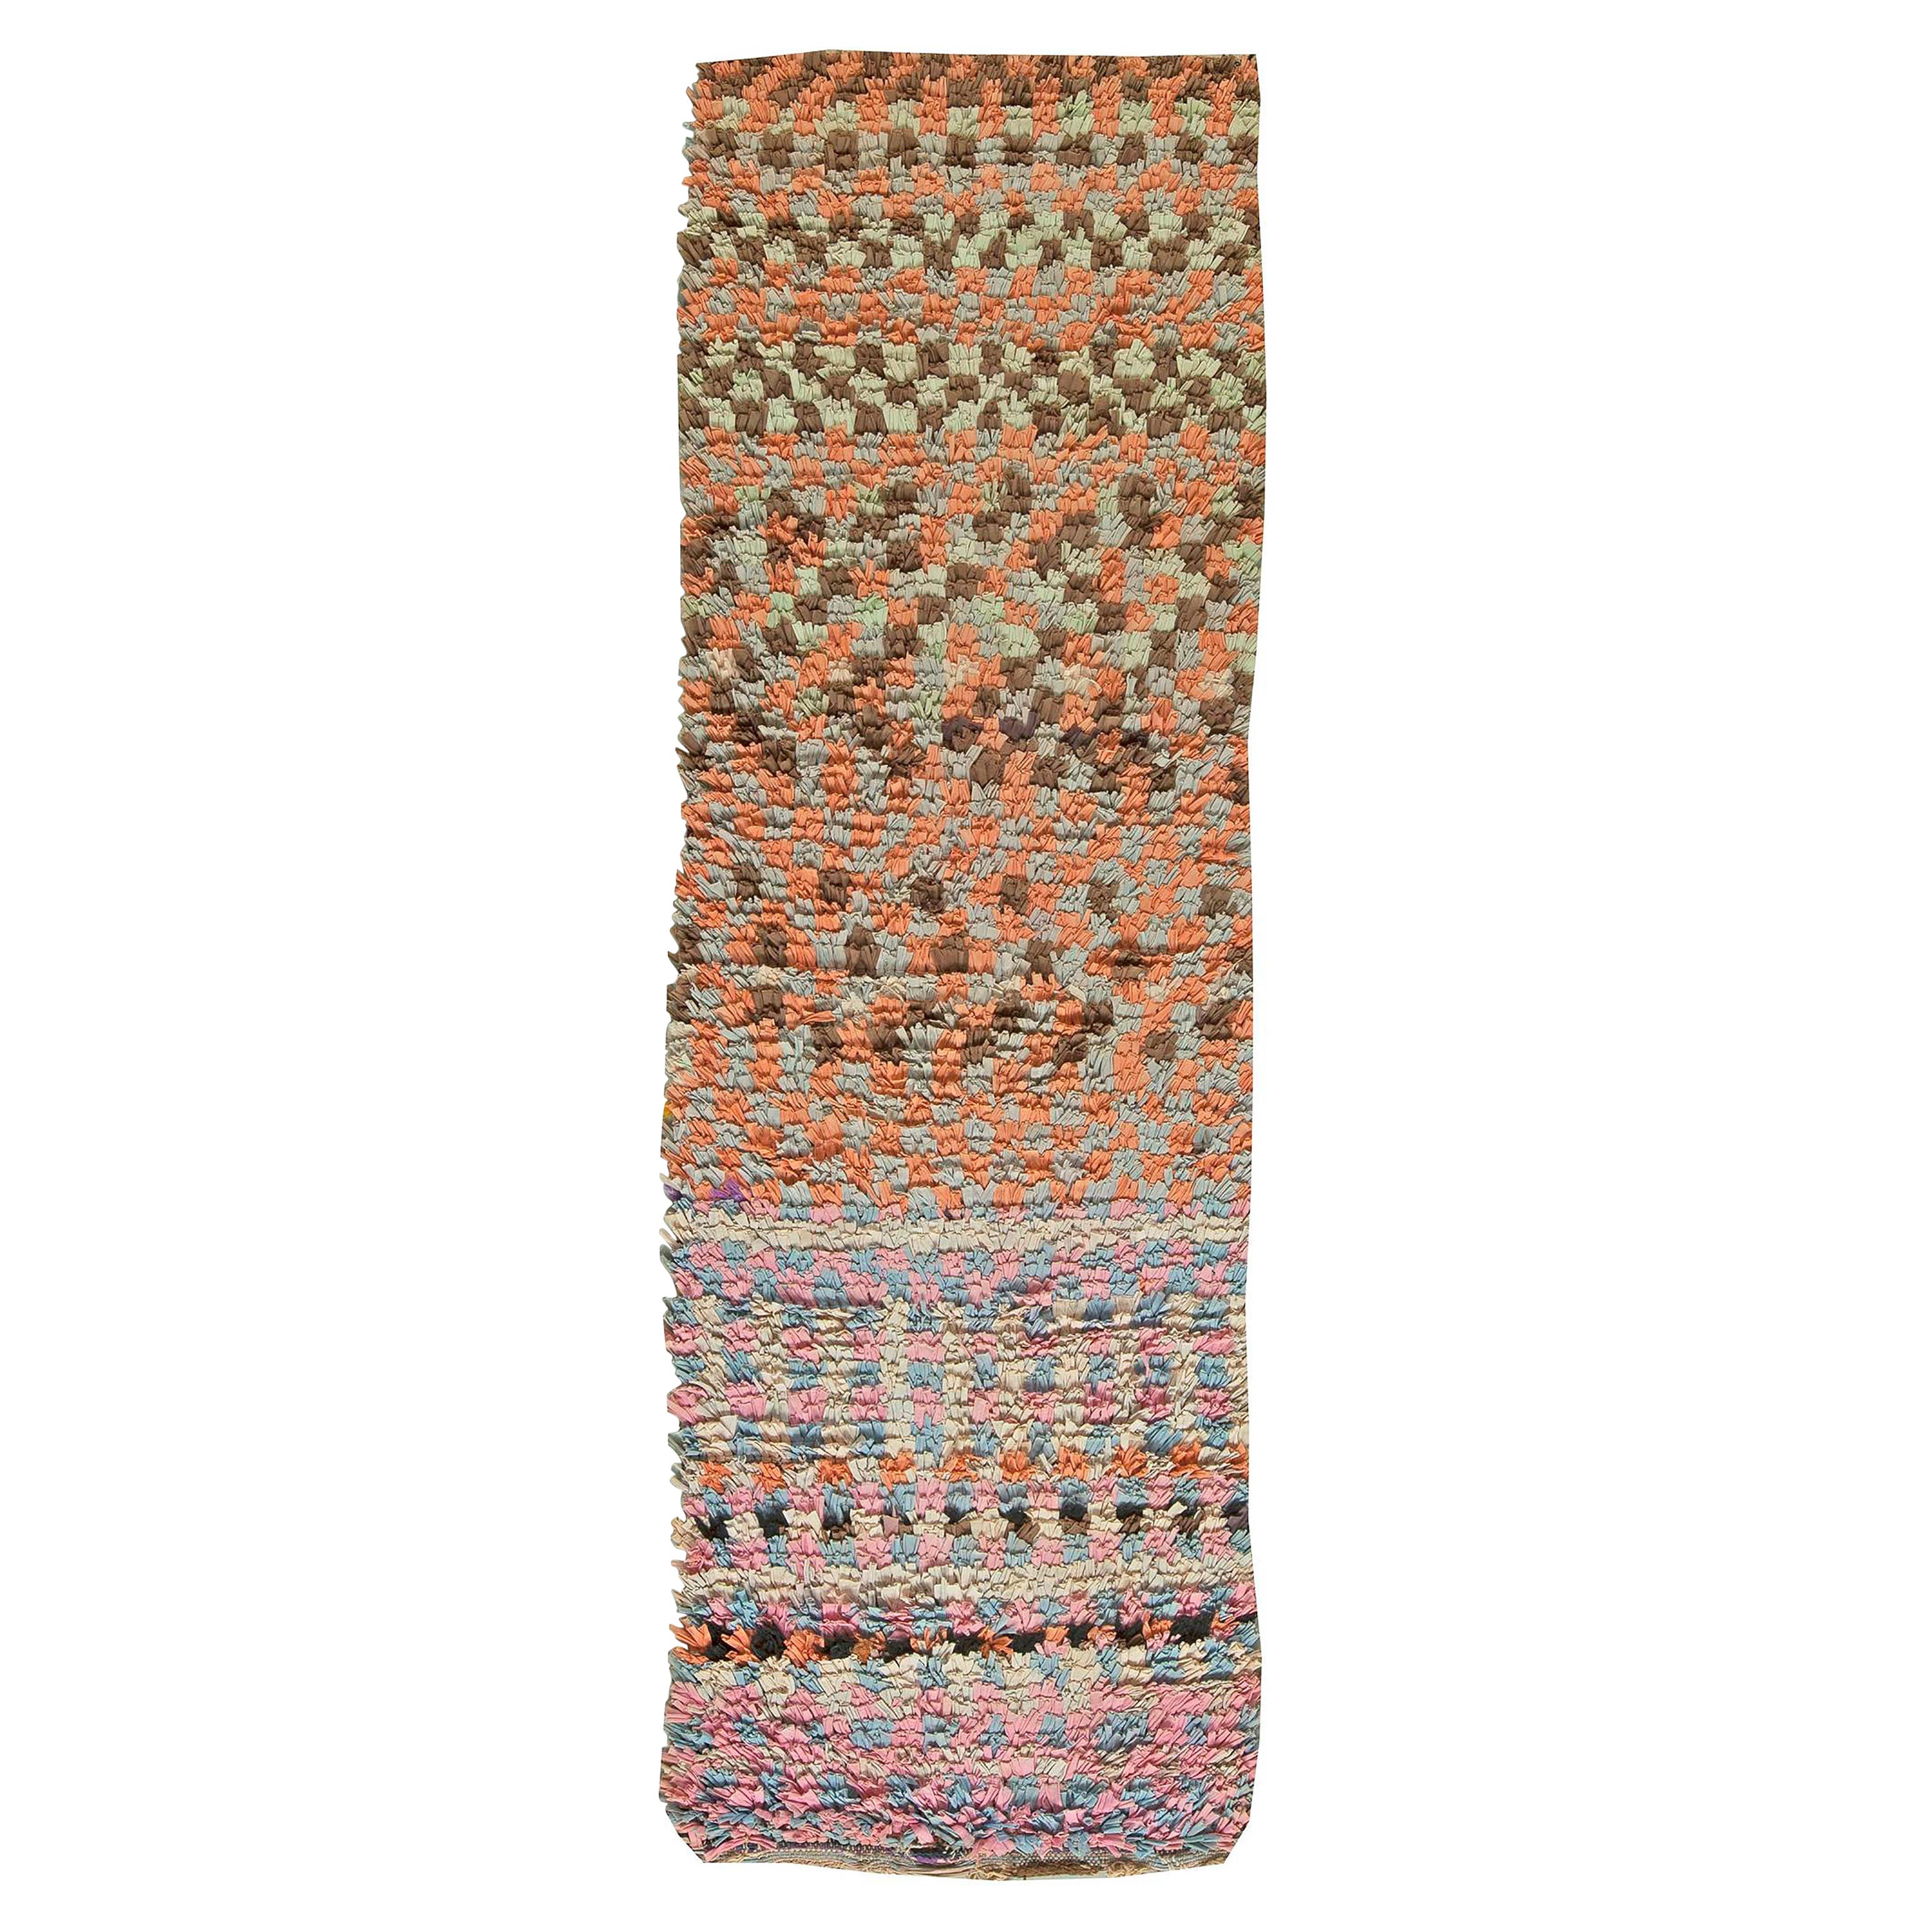 Vintage Colorful Moroccan Handmade Cotton Runner